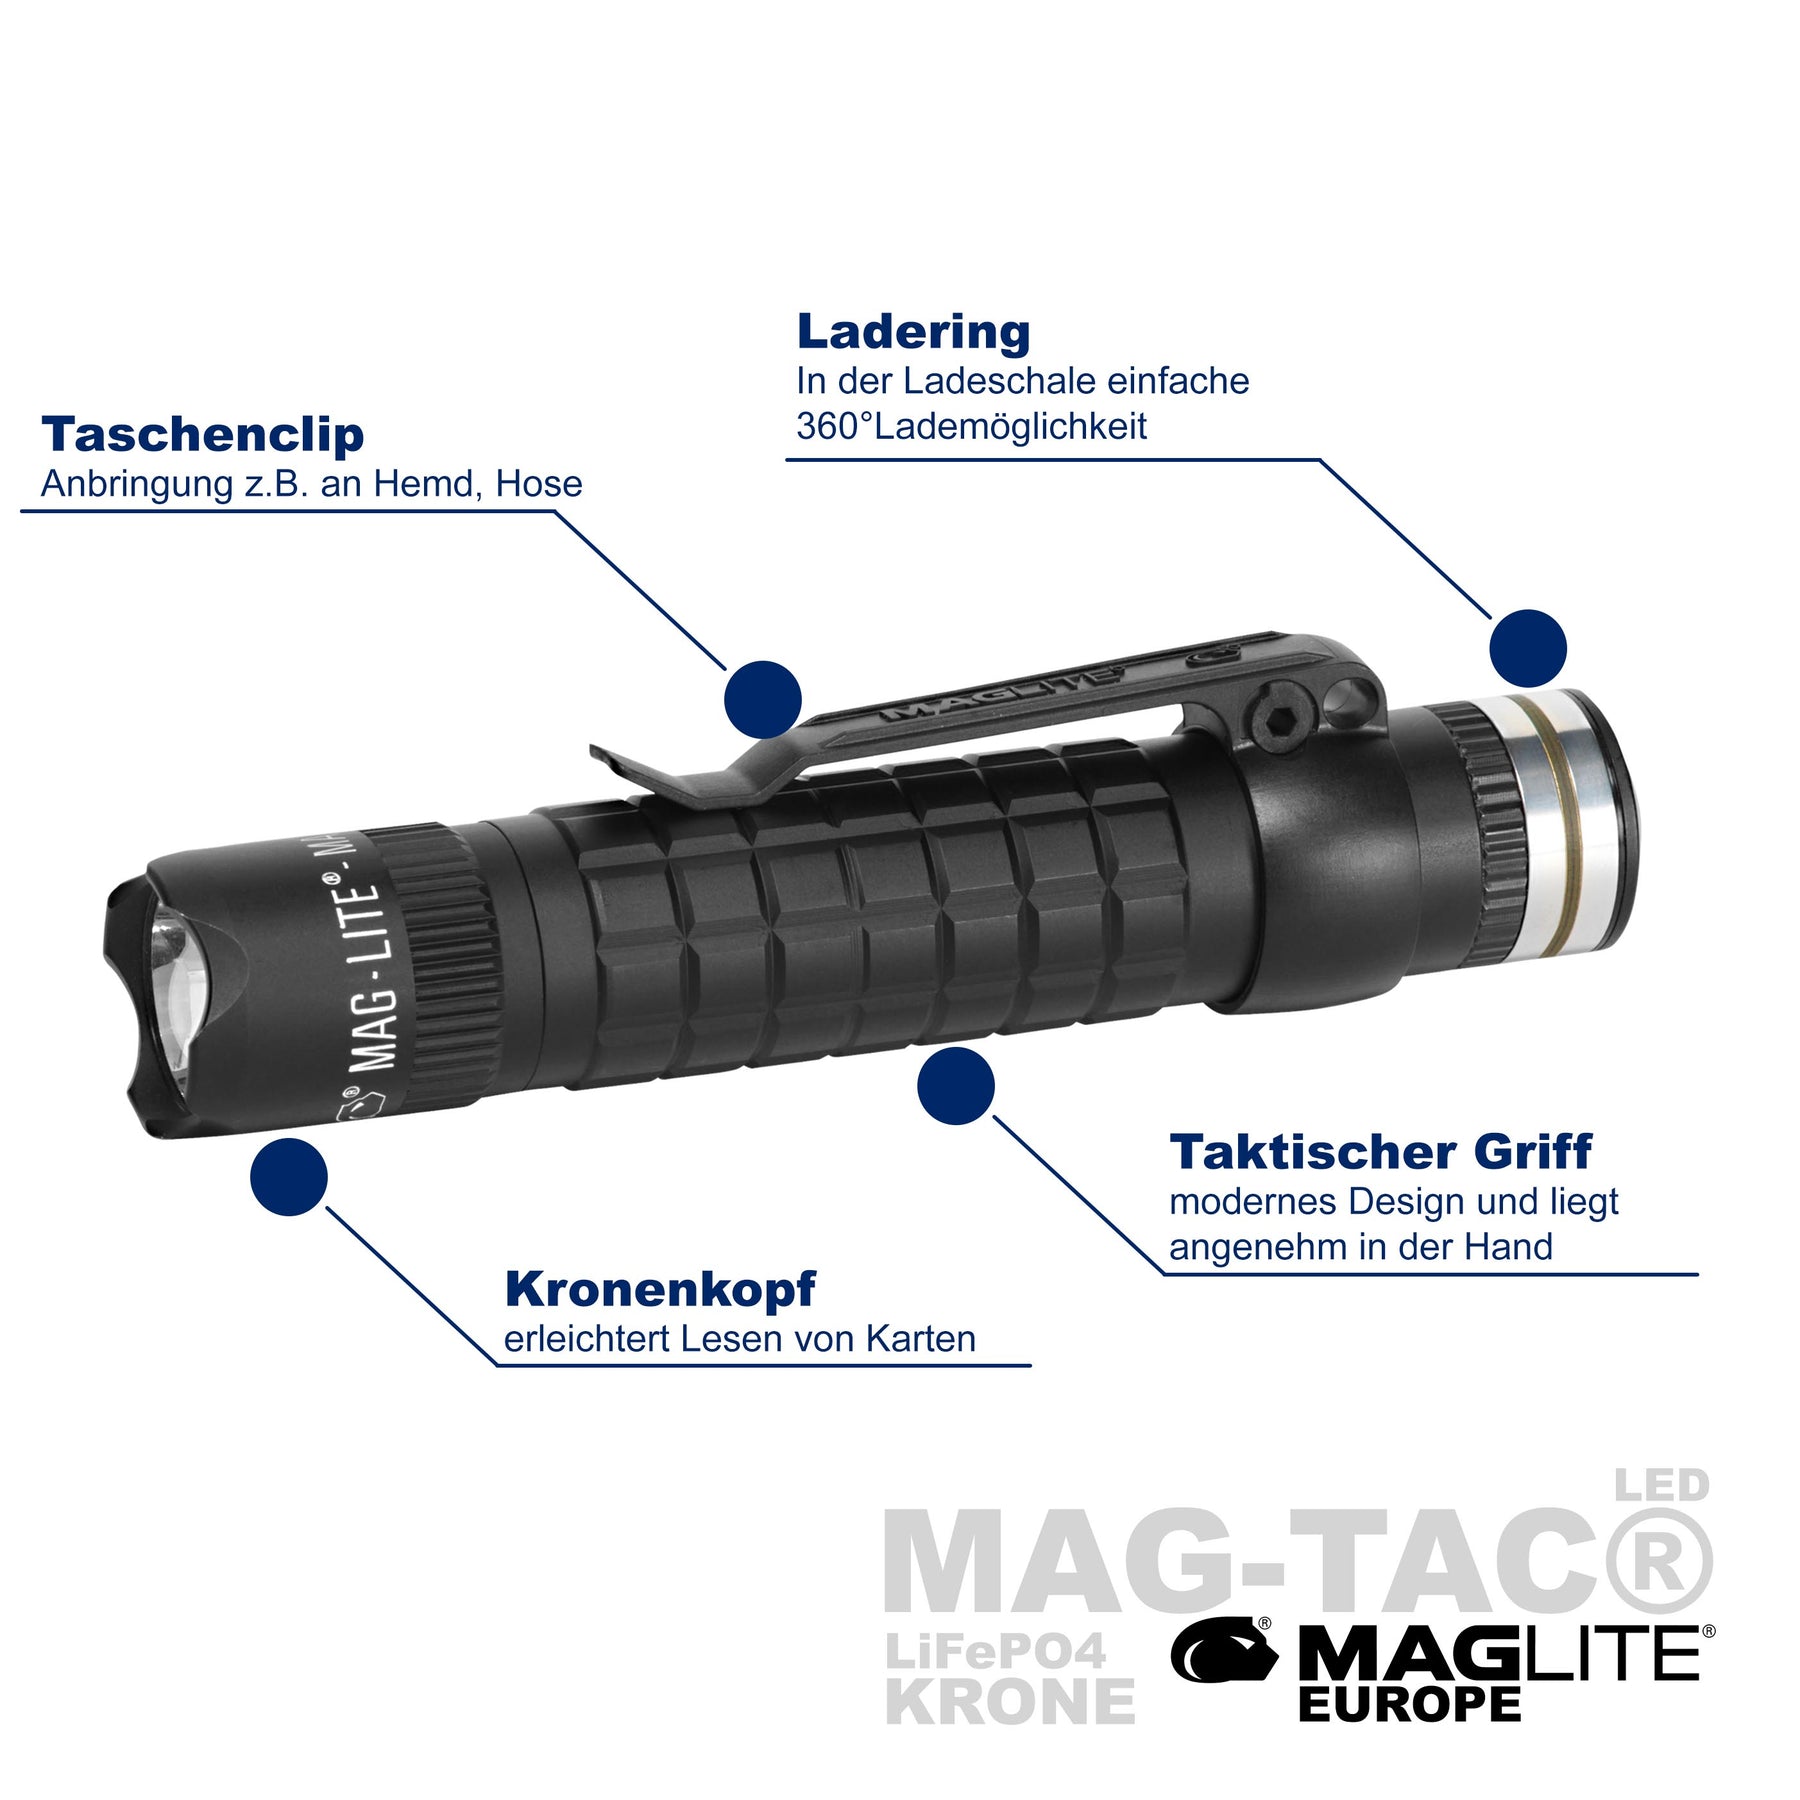 MAG-TAC® LED rechargeable – MAGLITE® Europe